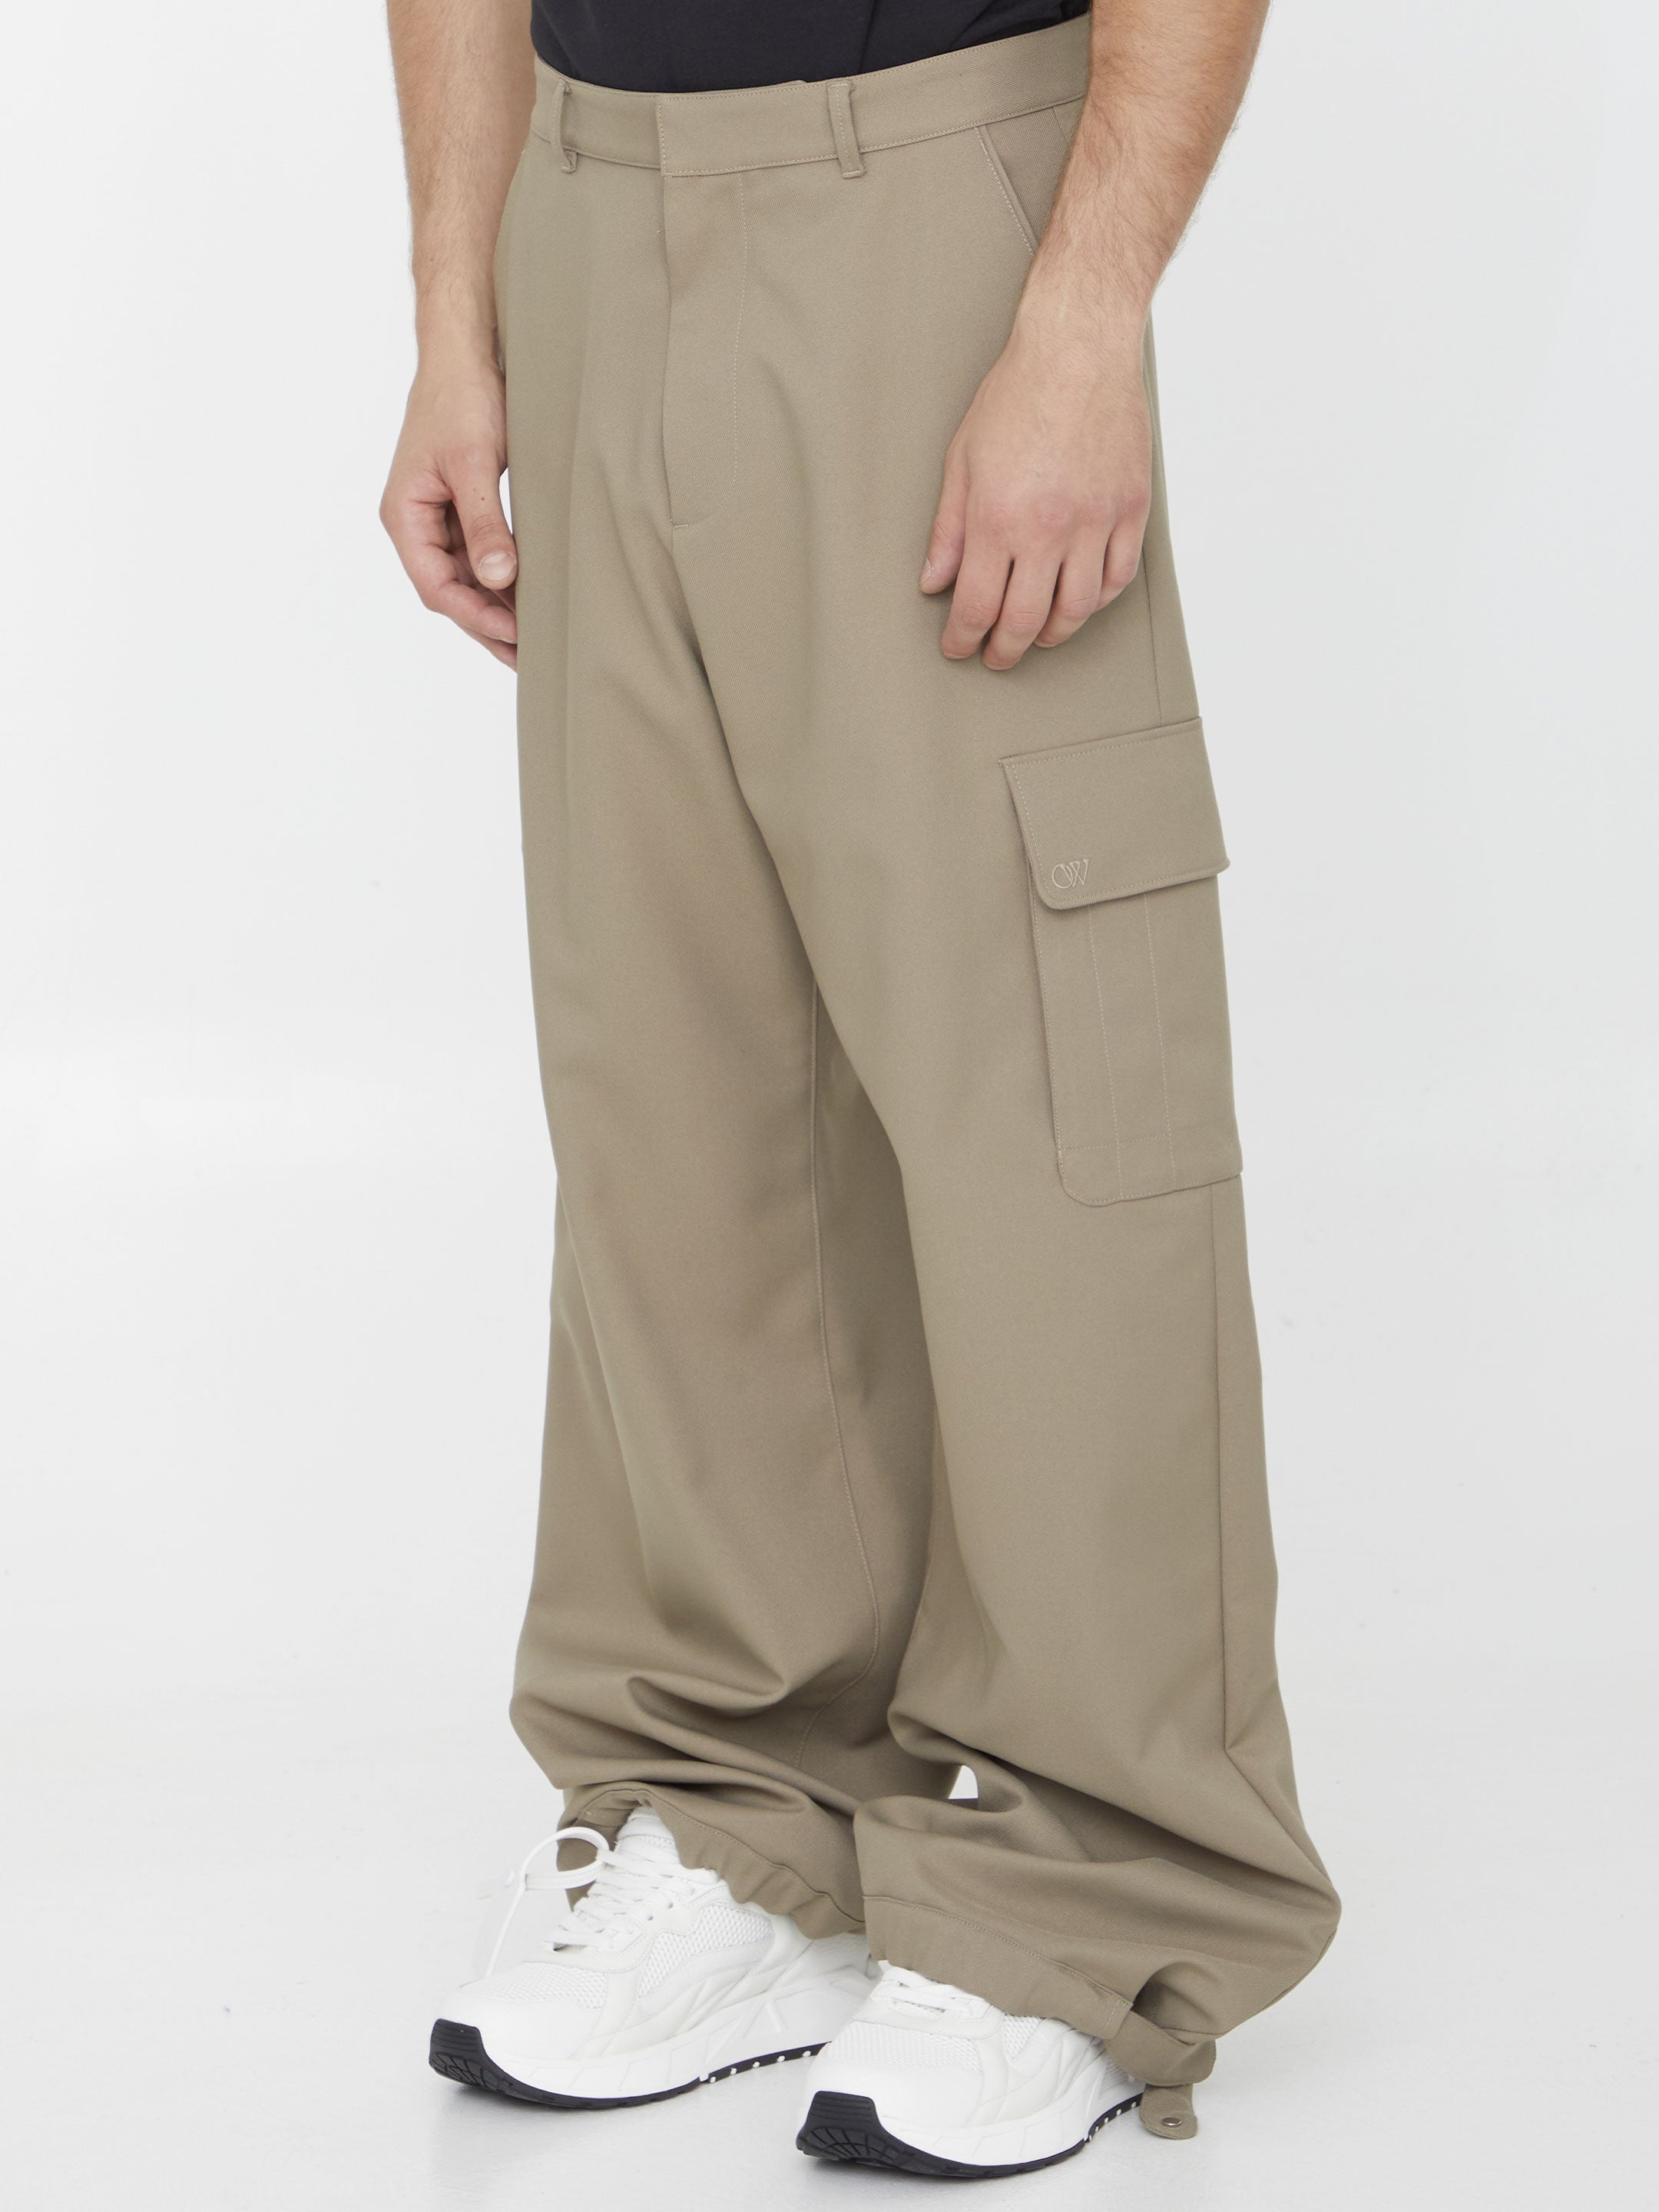 OFF-WHITE-OUTLET-SALE-OW-Emb-Drill-Cargo-pants-Hosen-ARCHIVE-COLLECTION-2.jpg